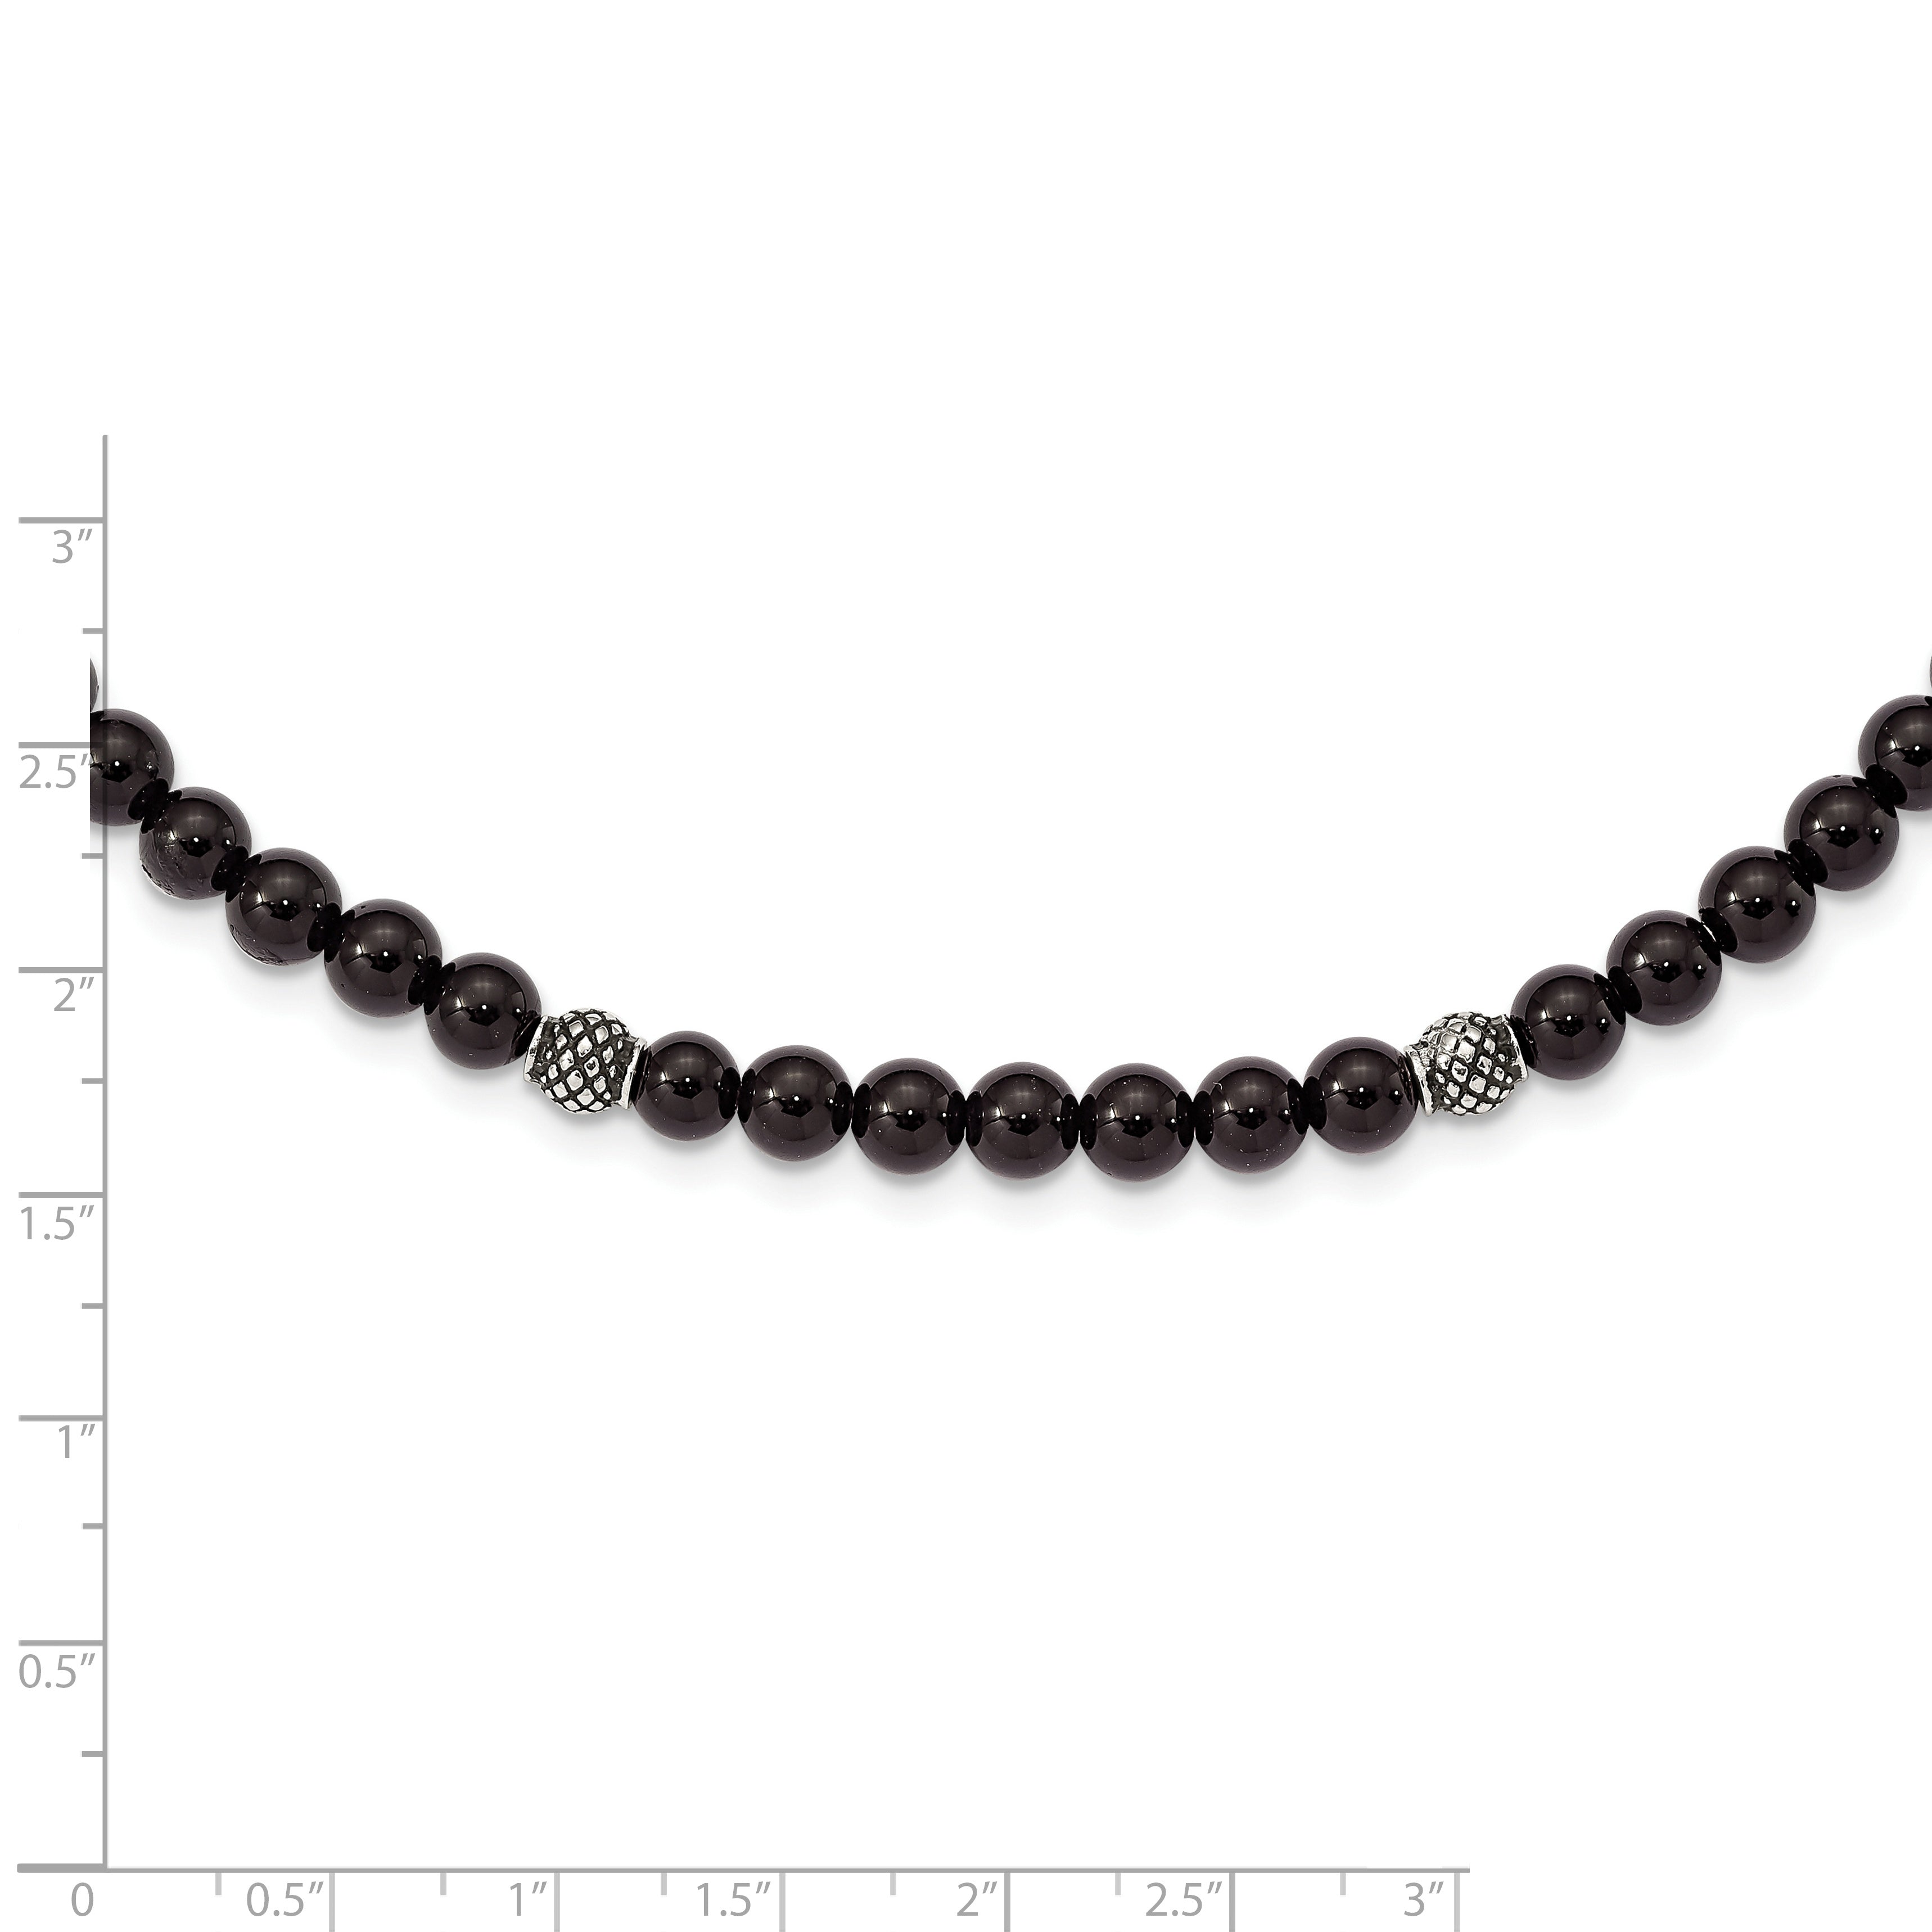 Chisel Stainless Steel Antiqued and Polished Black Agate Beaded 18.5 inch Necklace with 2 inch extension